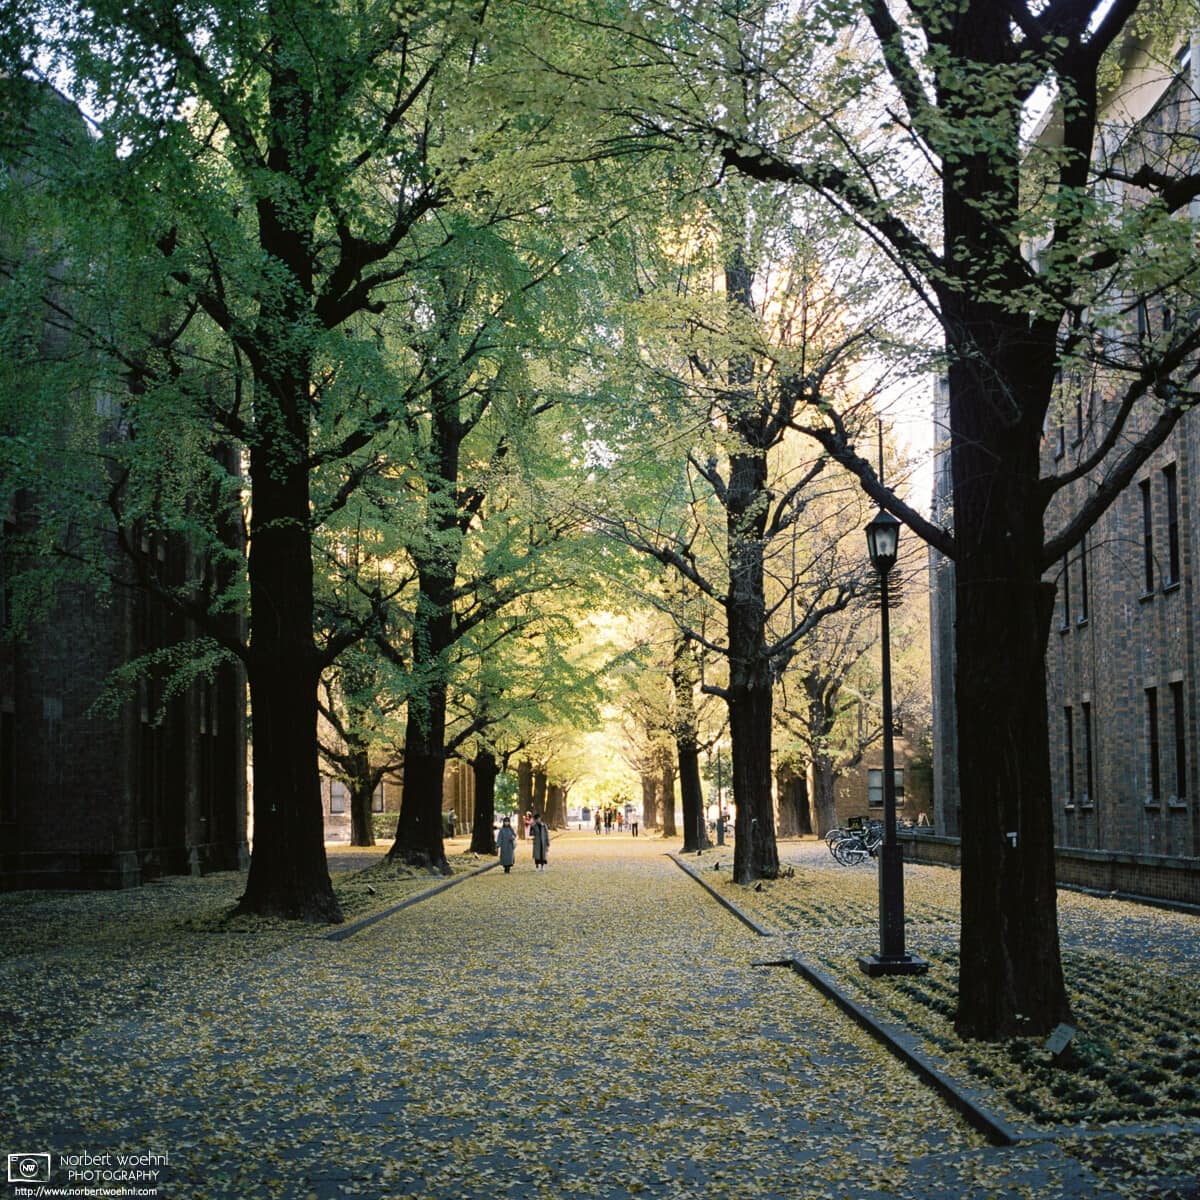 An autumn walk on a fine November day at the campus of the University of Tokyo, Japan.